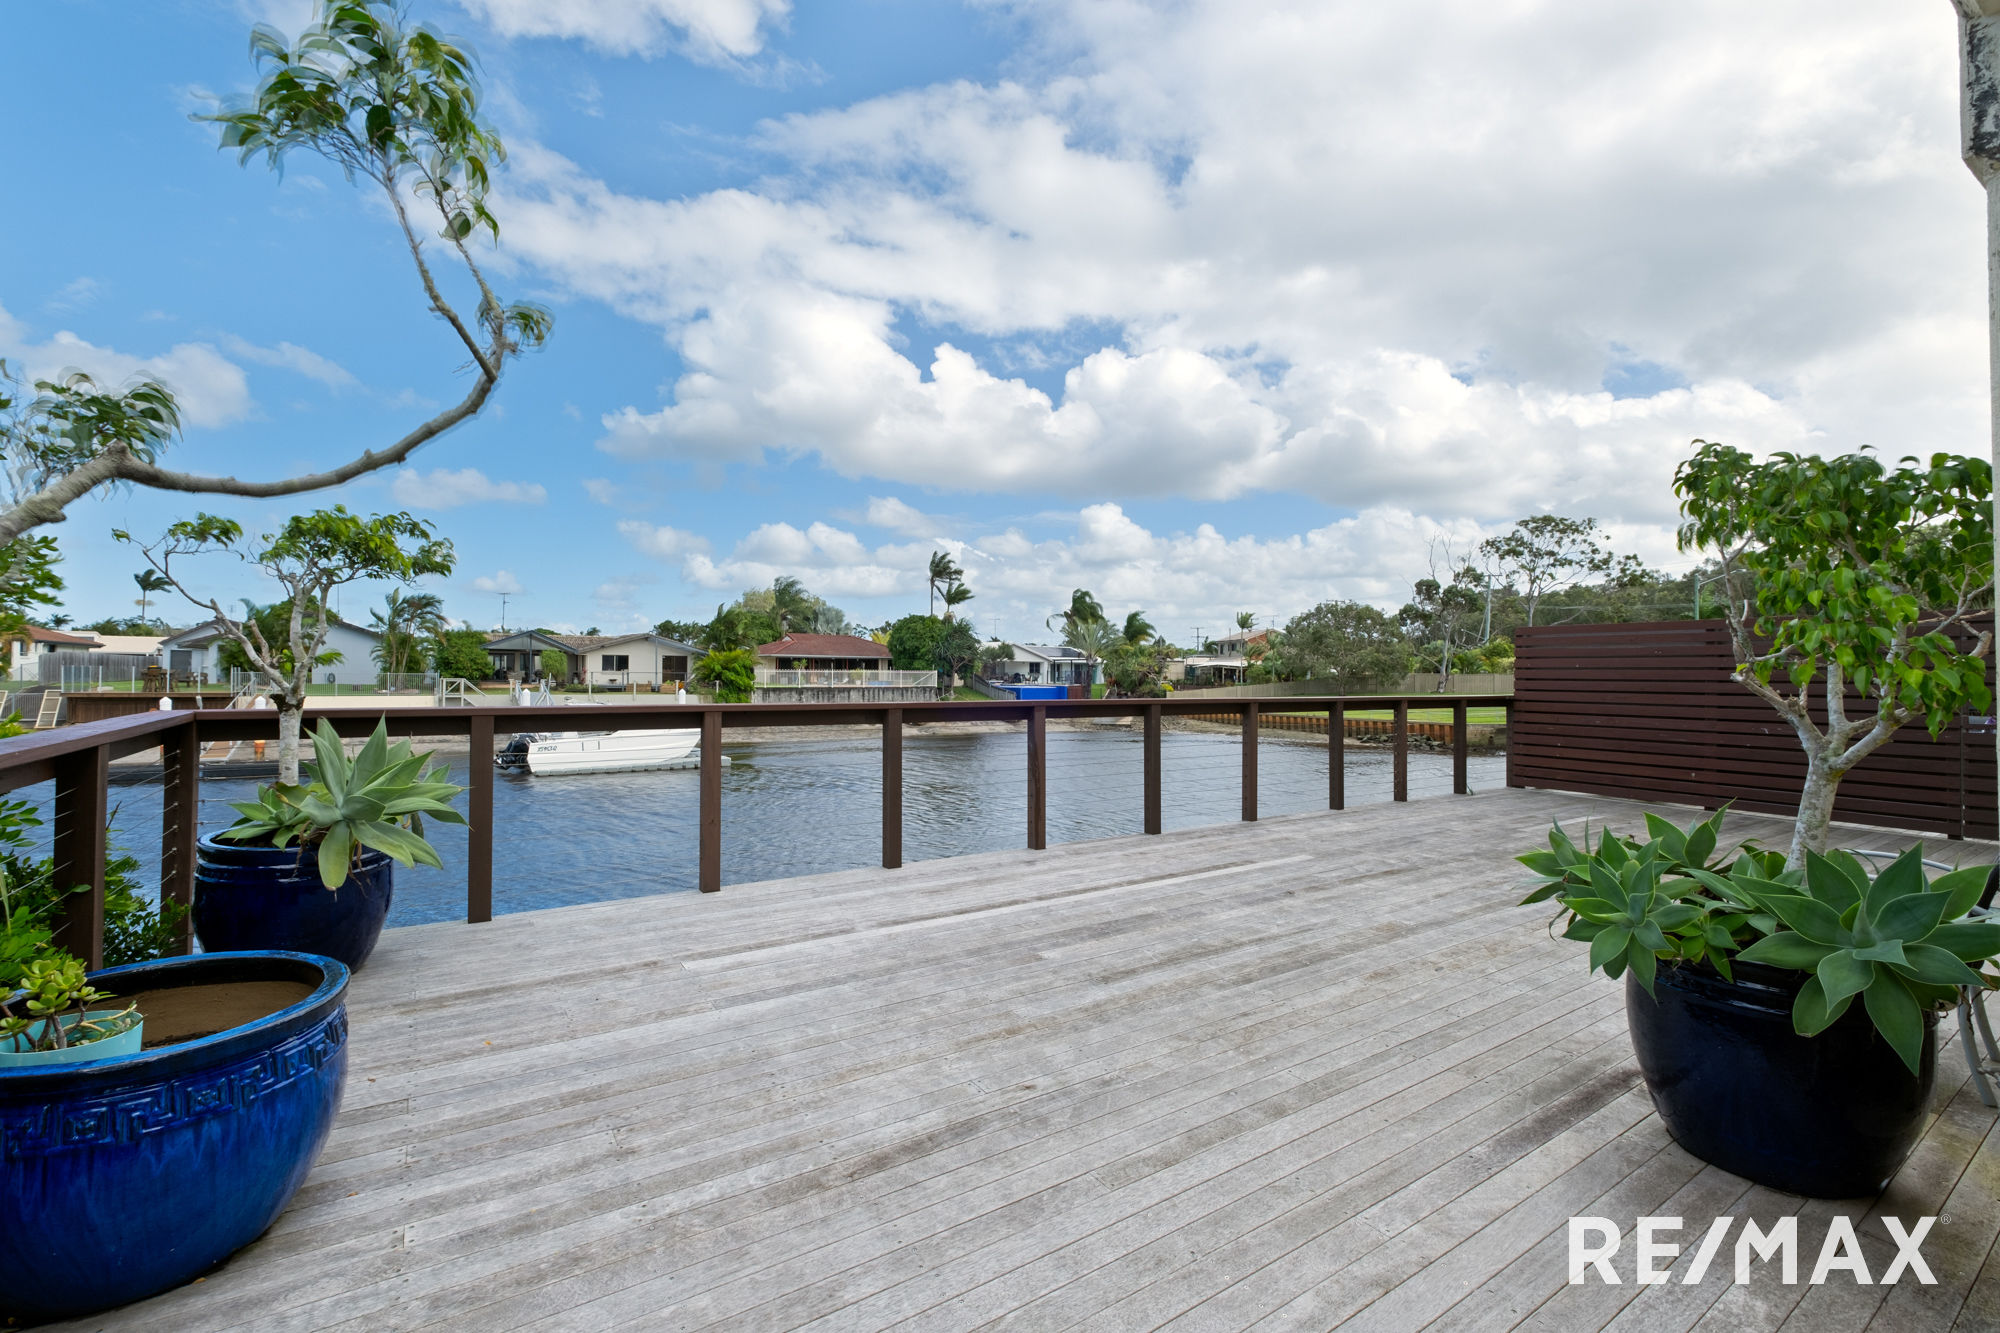 FRESHLY PAINTED WATERSIDE TWO BEDROOM APARTMENT WITH AIR CONDITIONING.